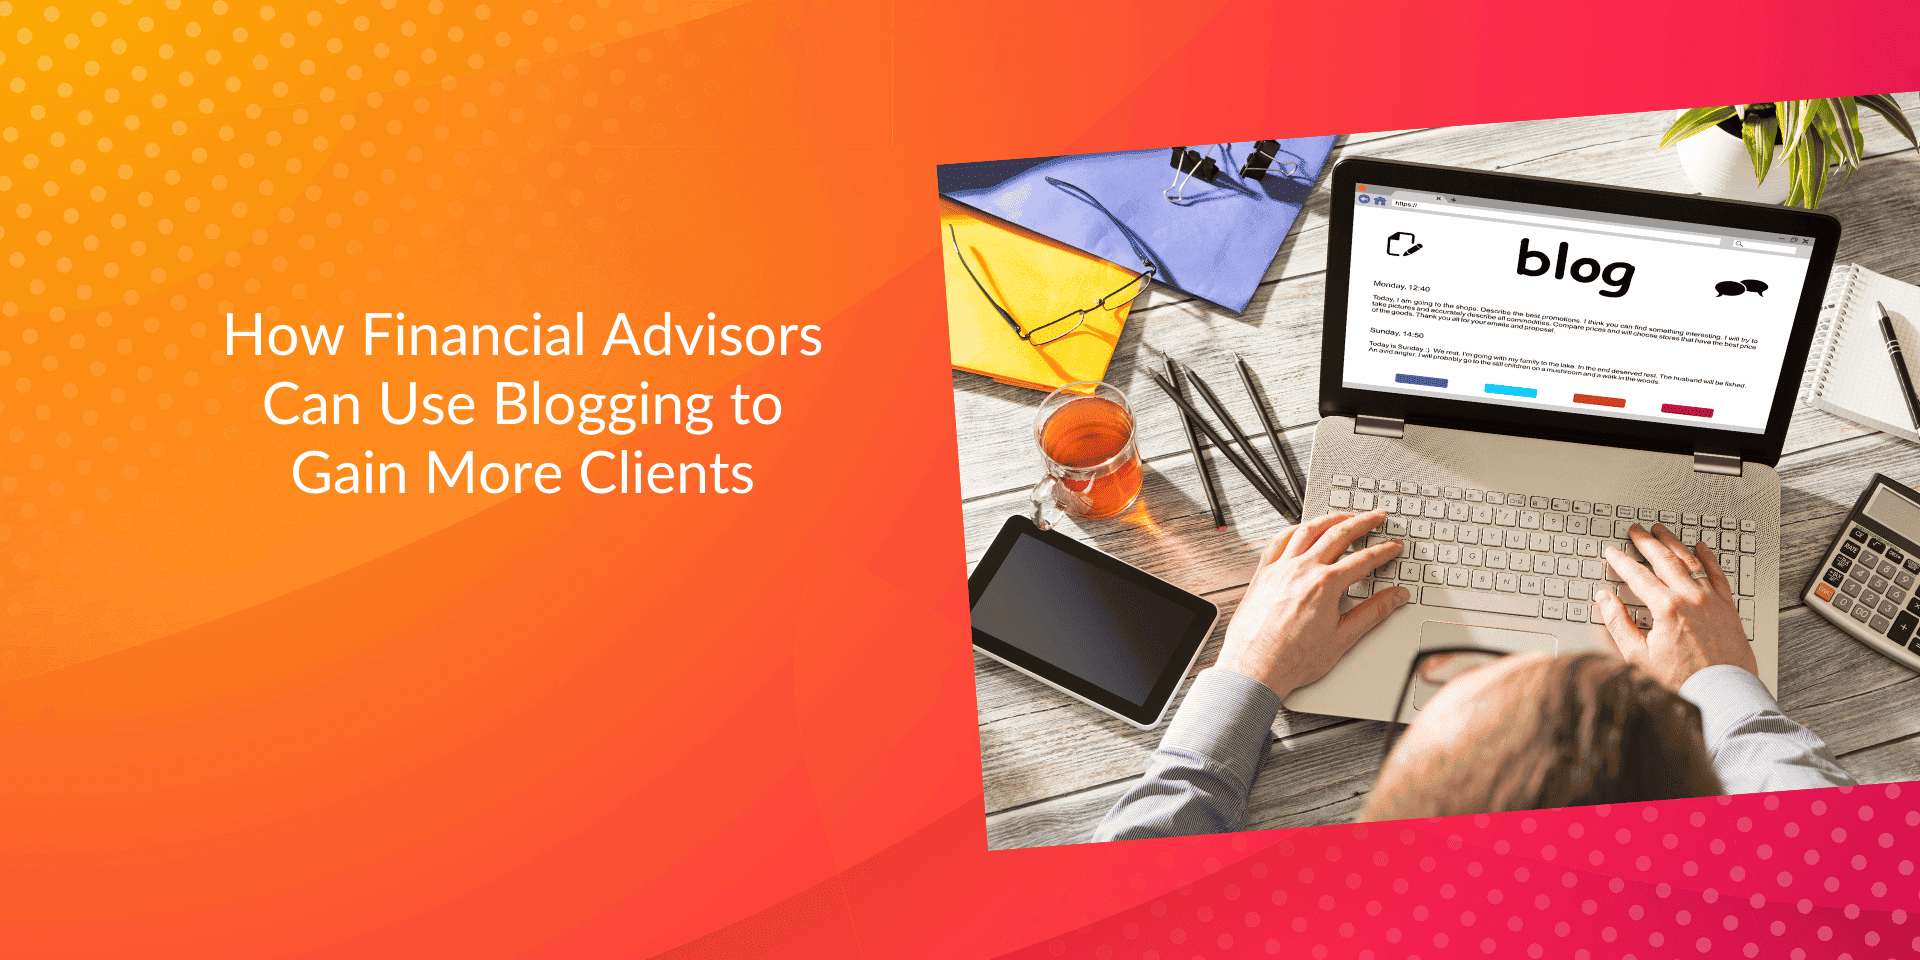 How Financial Advisors Can Use Blogging to Gain More Clients